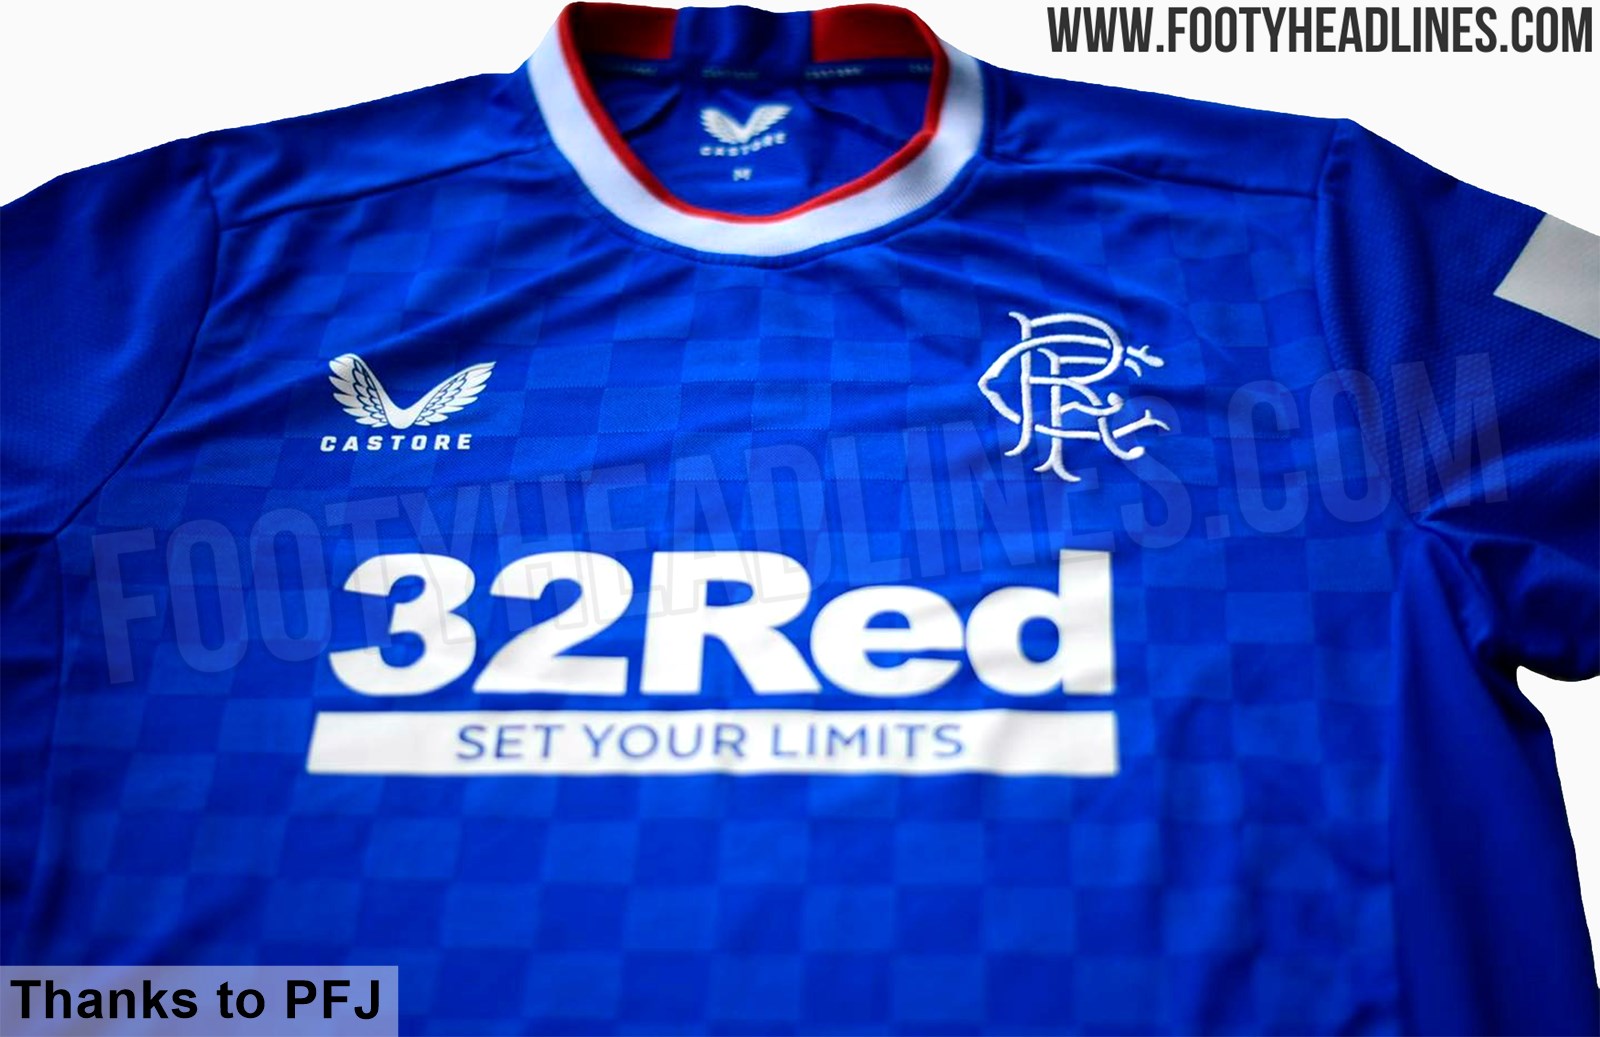 Rangers reveal 2022/23 home kit with retro design, How to buy